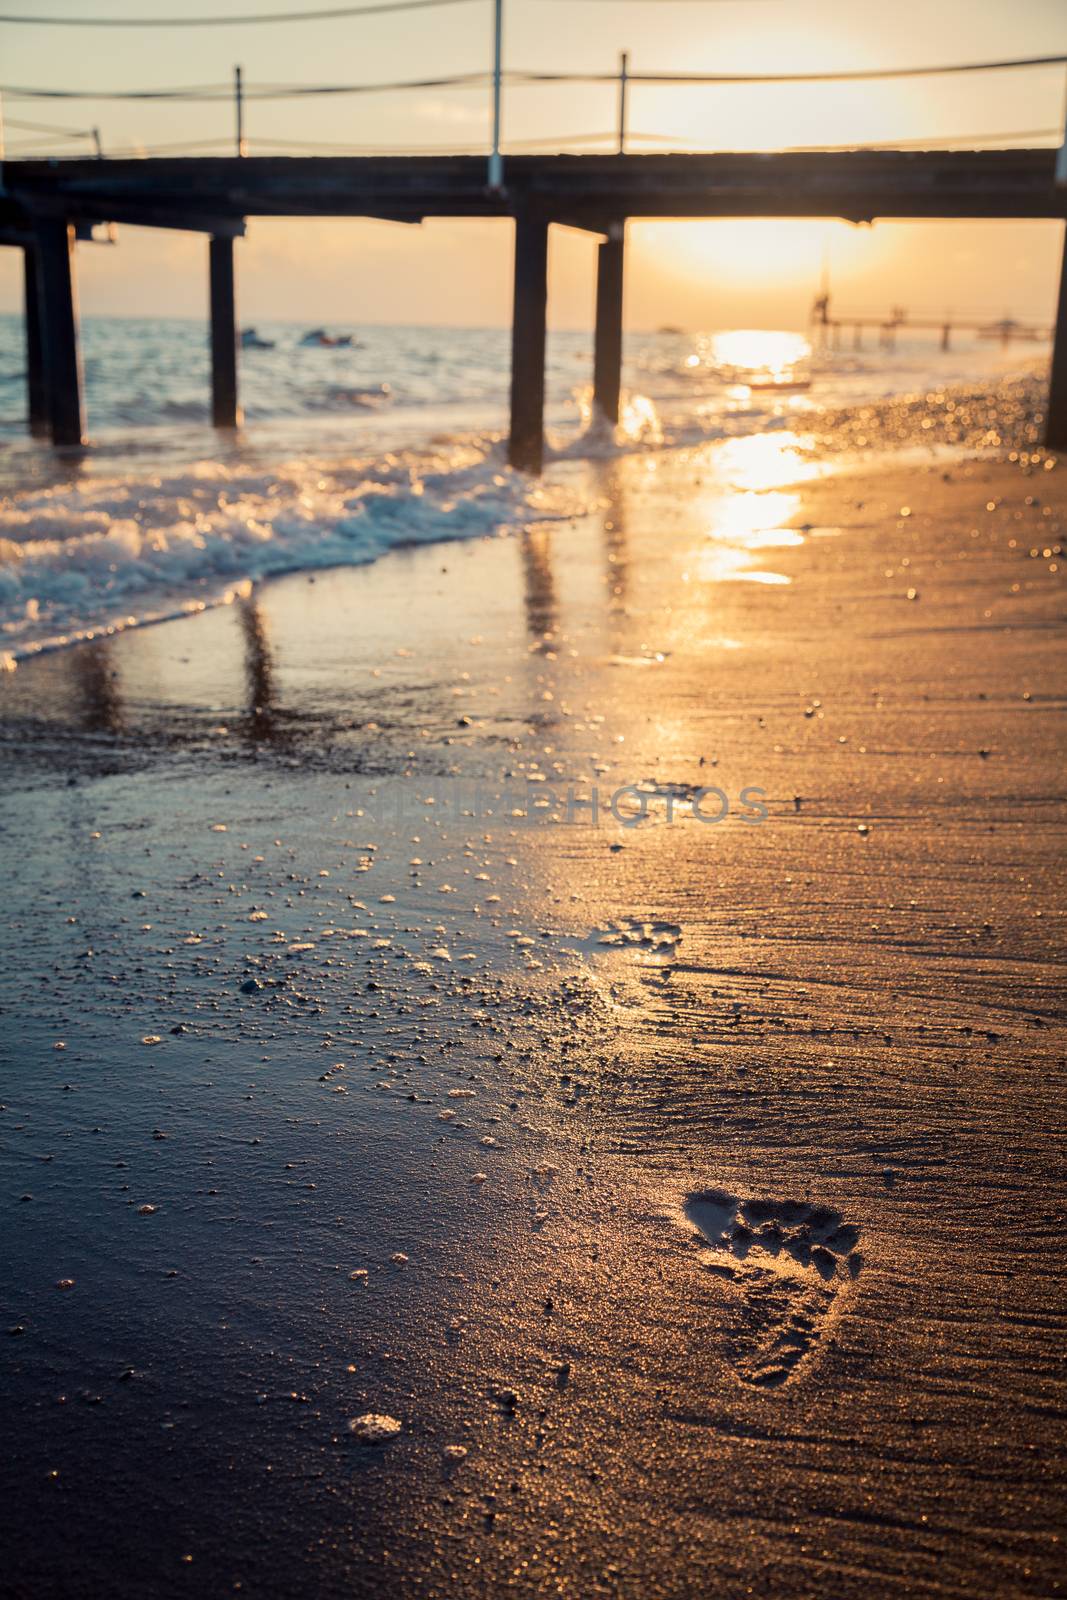 Footprints on the beach in the evening